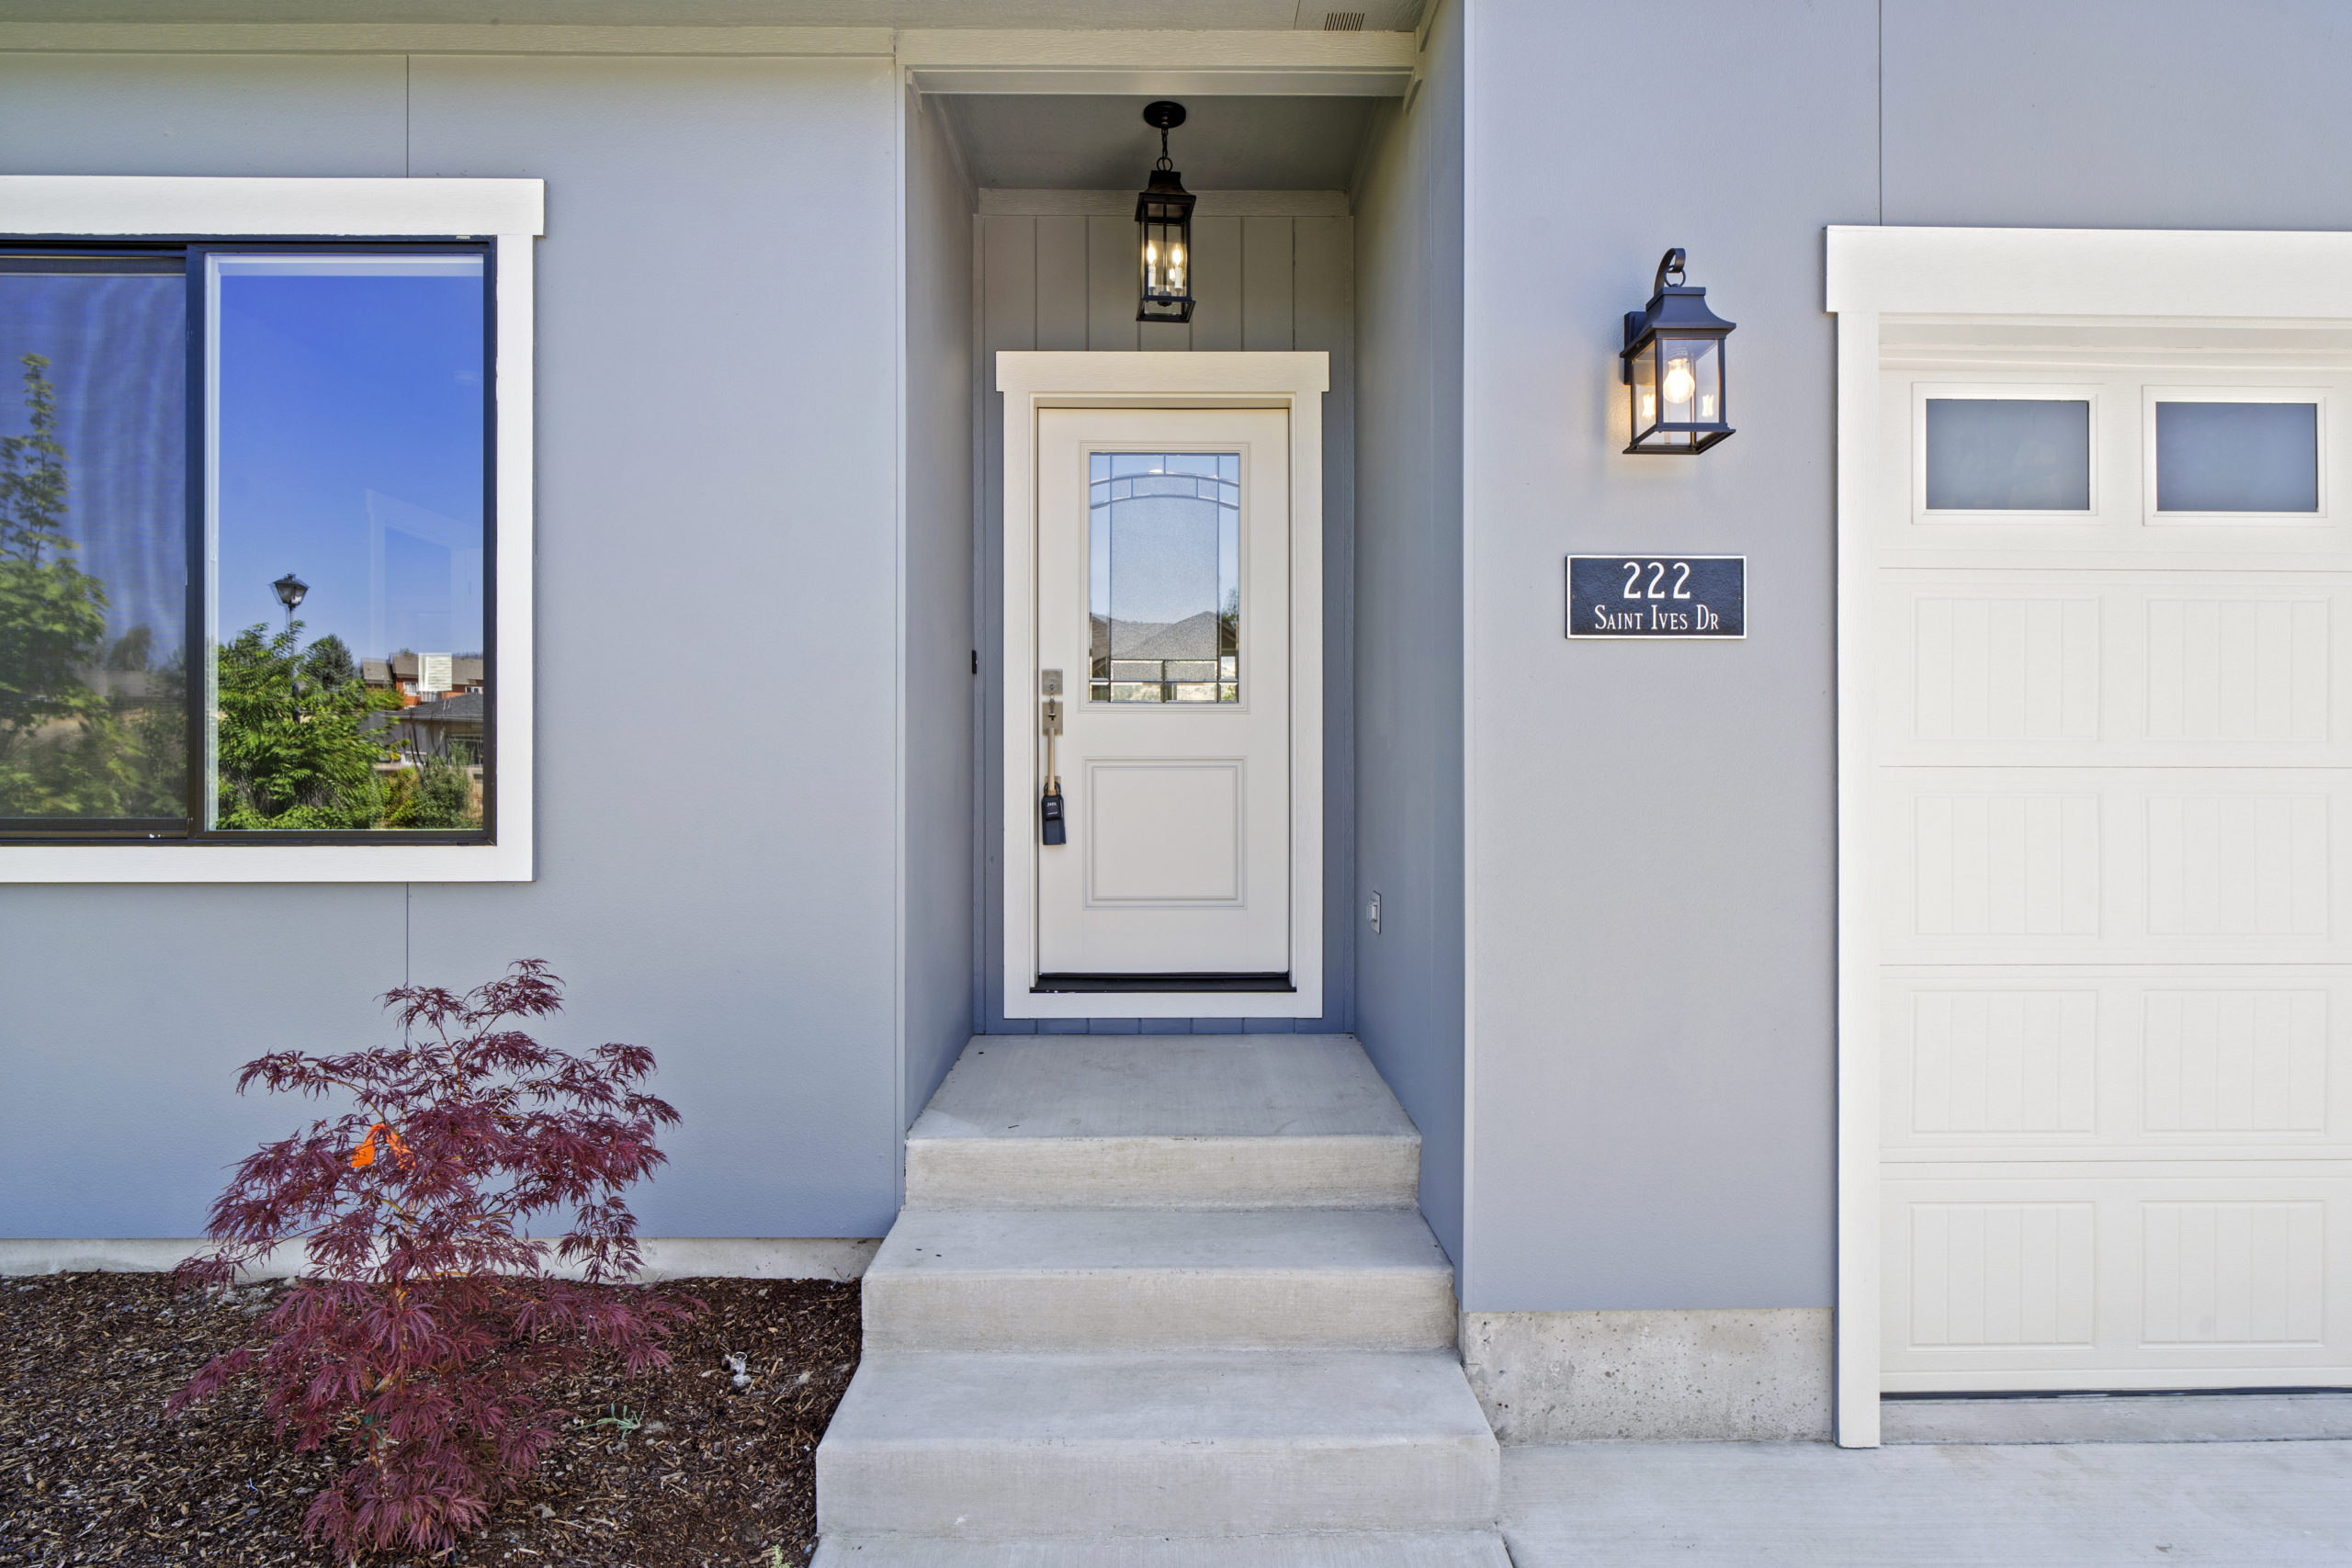 An inviting blue house with a charming white door,